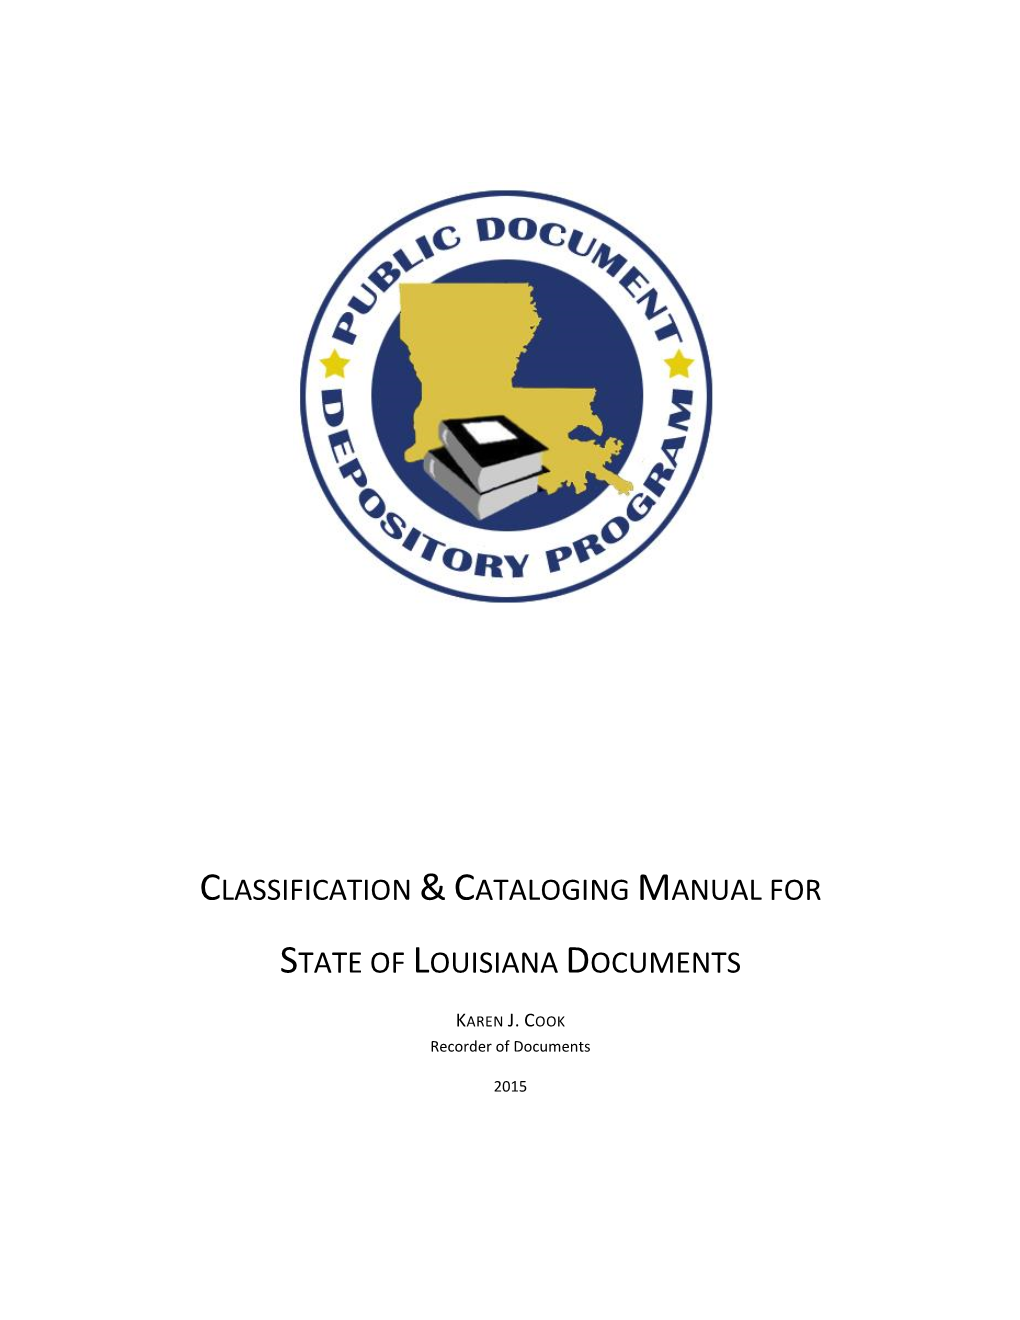 Classification &Cataloging Manual for State Of